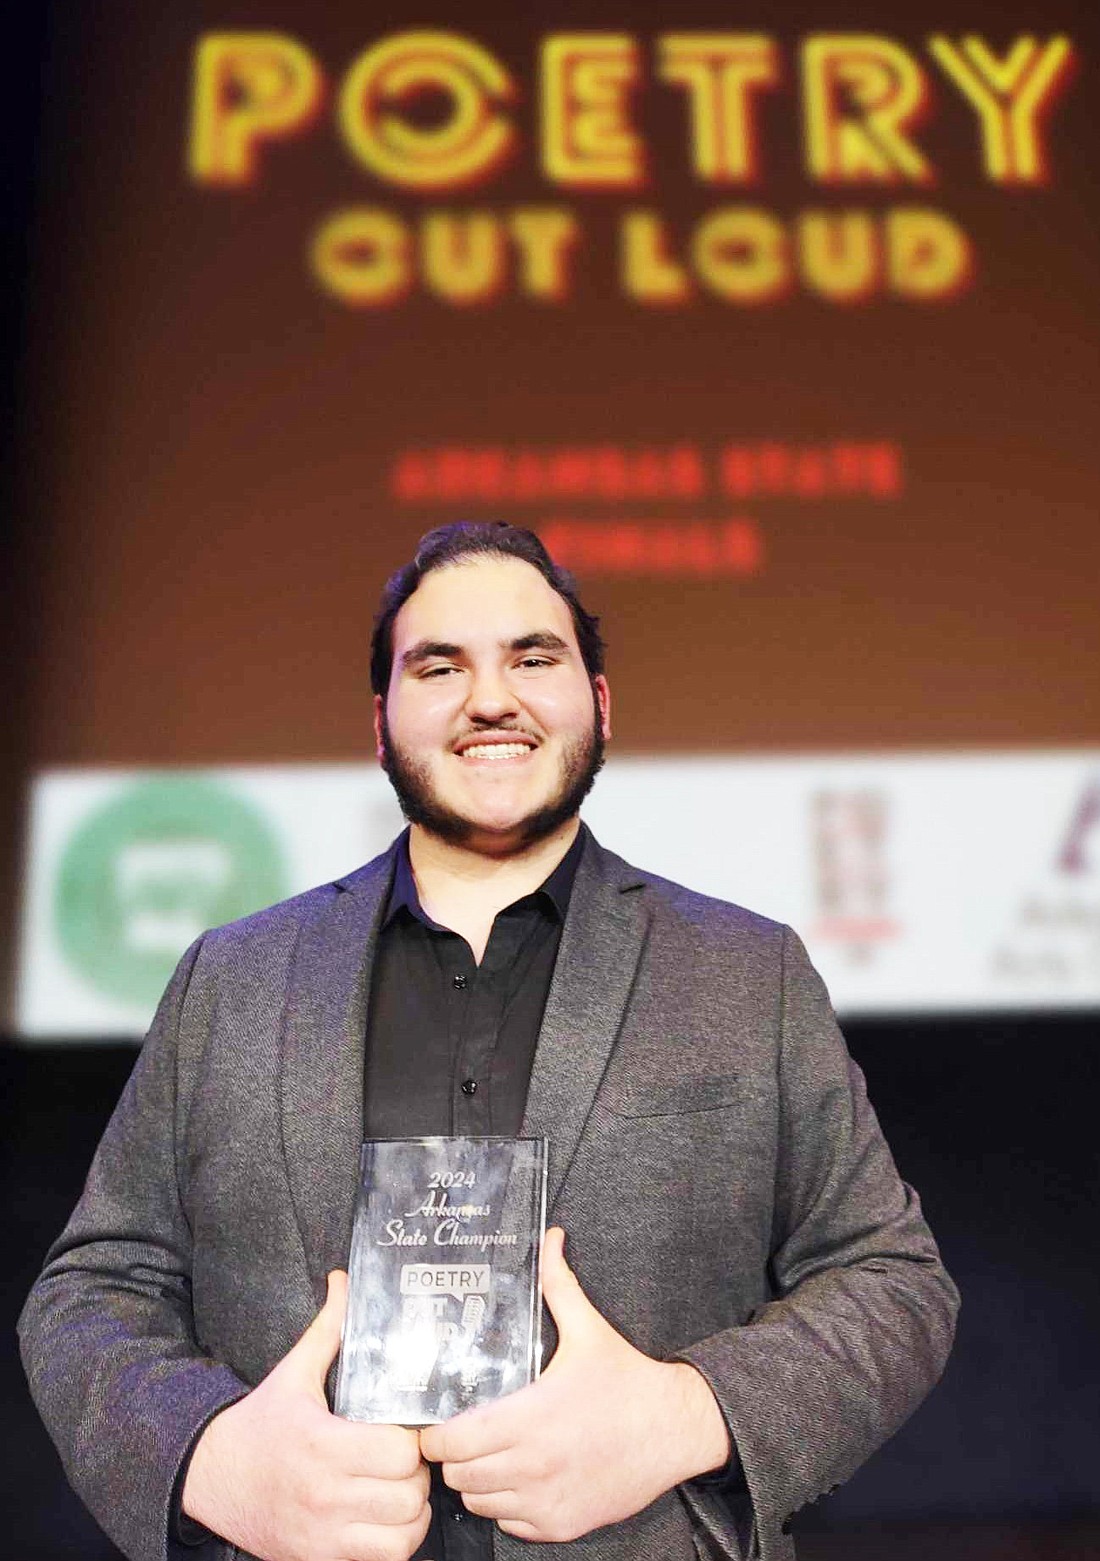 SHERIDAN HIGH SCHOOL senior Tucker Dowler recently earned the Arkansas Poetry Out Loud state title.